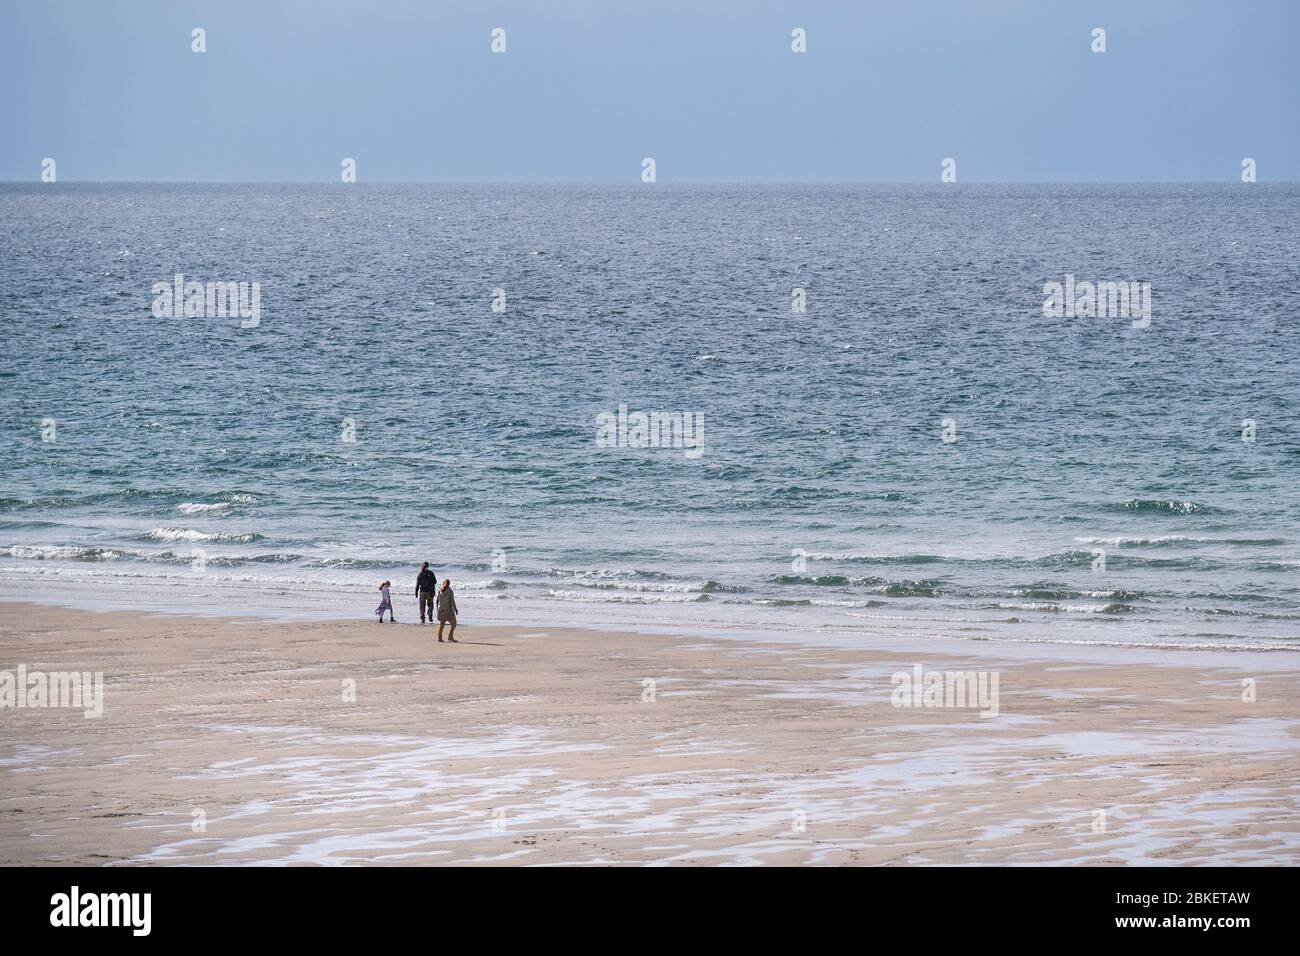 Due to the Coronavirus Covid 19 pandemic the normally busy Fistral Beach is now virtually empty in Newquay in Cornwall. Stock Photo